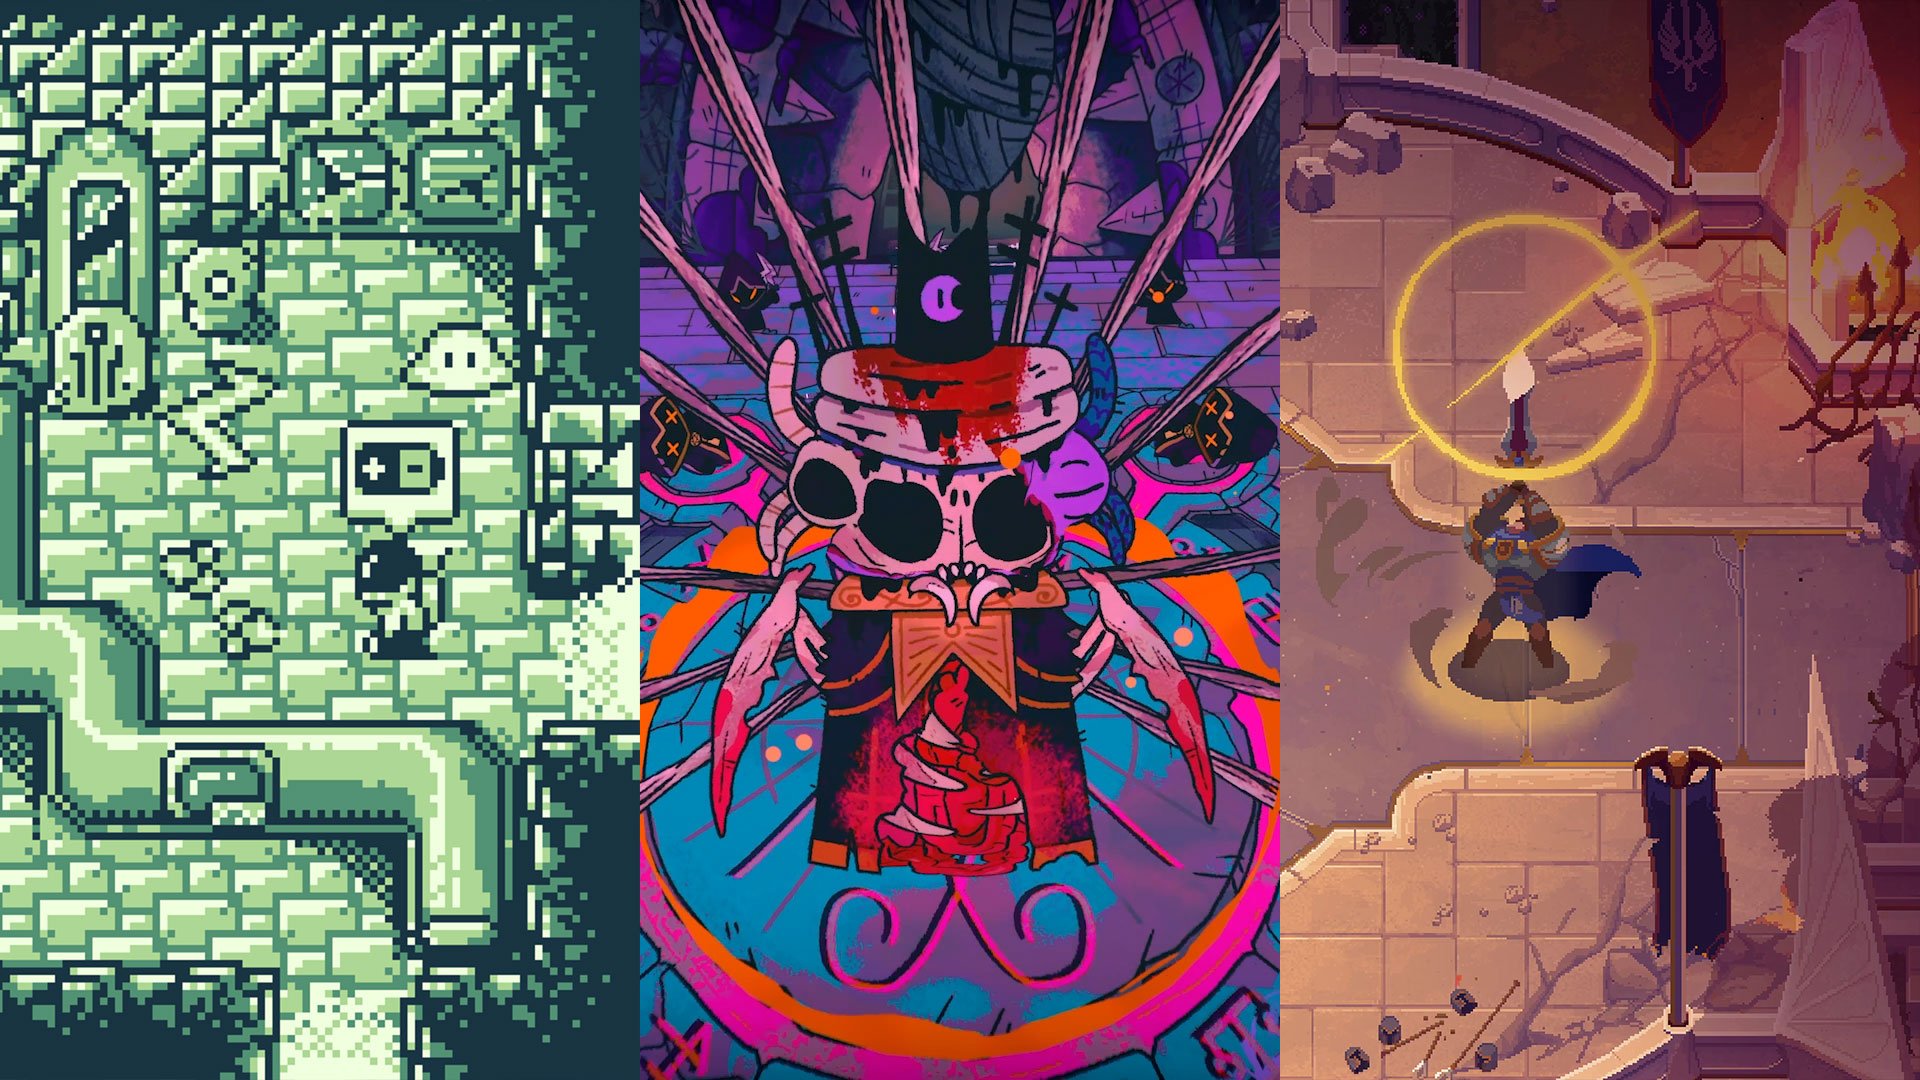 More awesome indie games on the way from Annapurna Interactive - News -  Nintendo Official Site